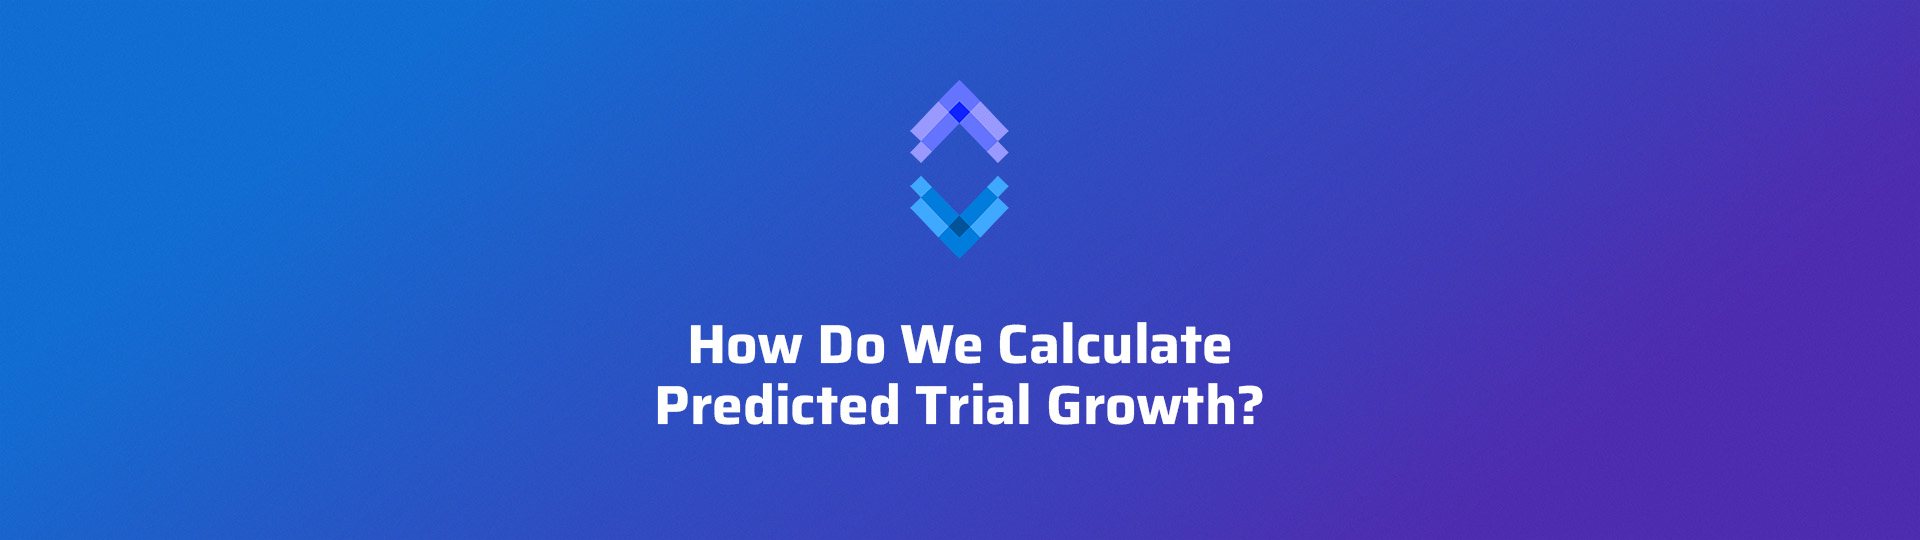 How Do We Calculate Predicted Trial Growth